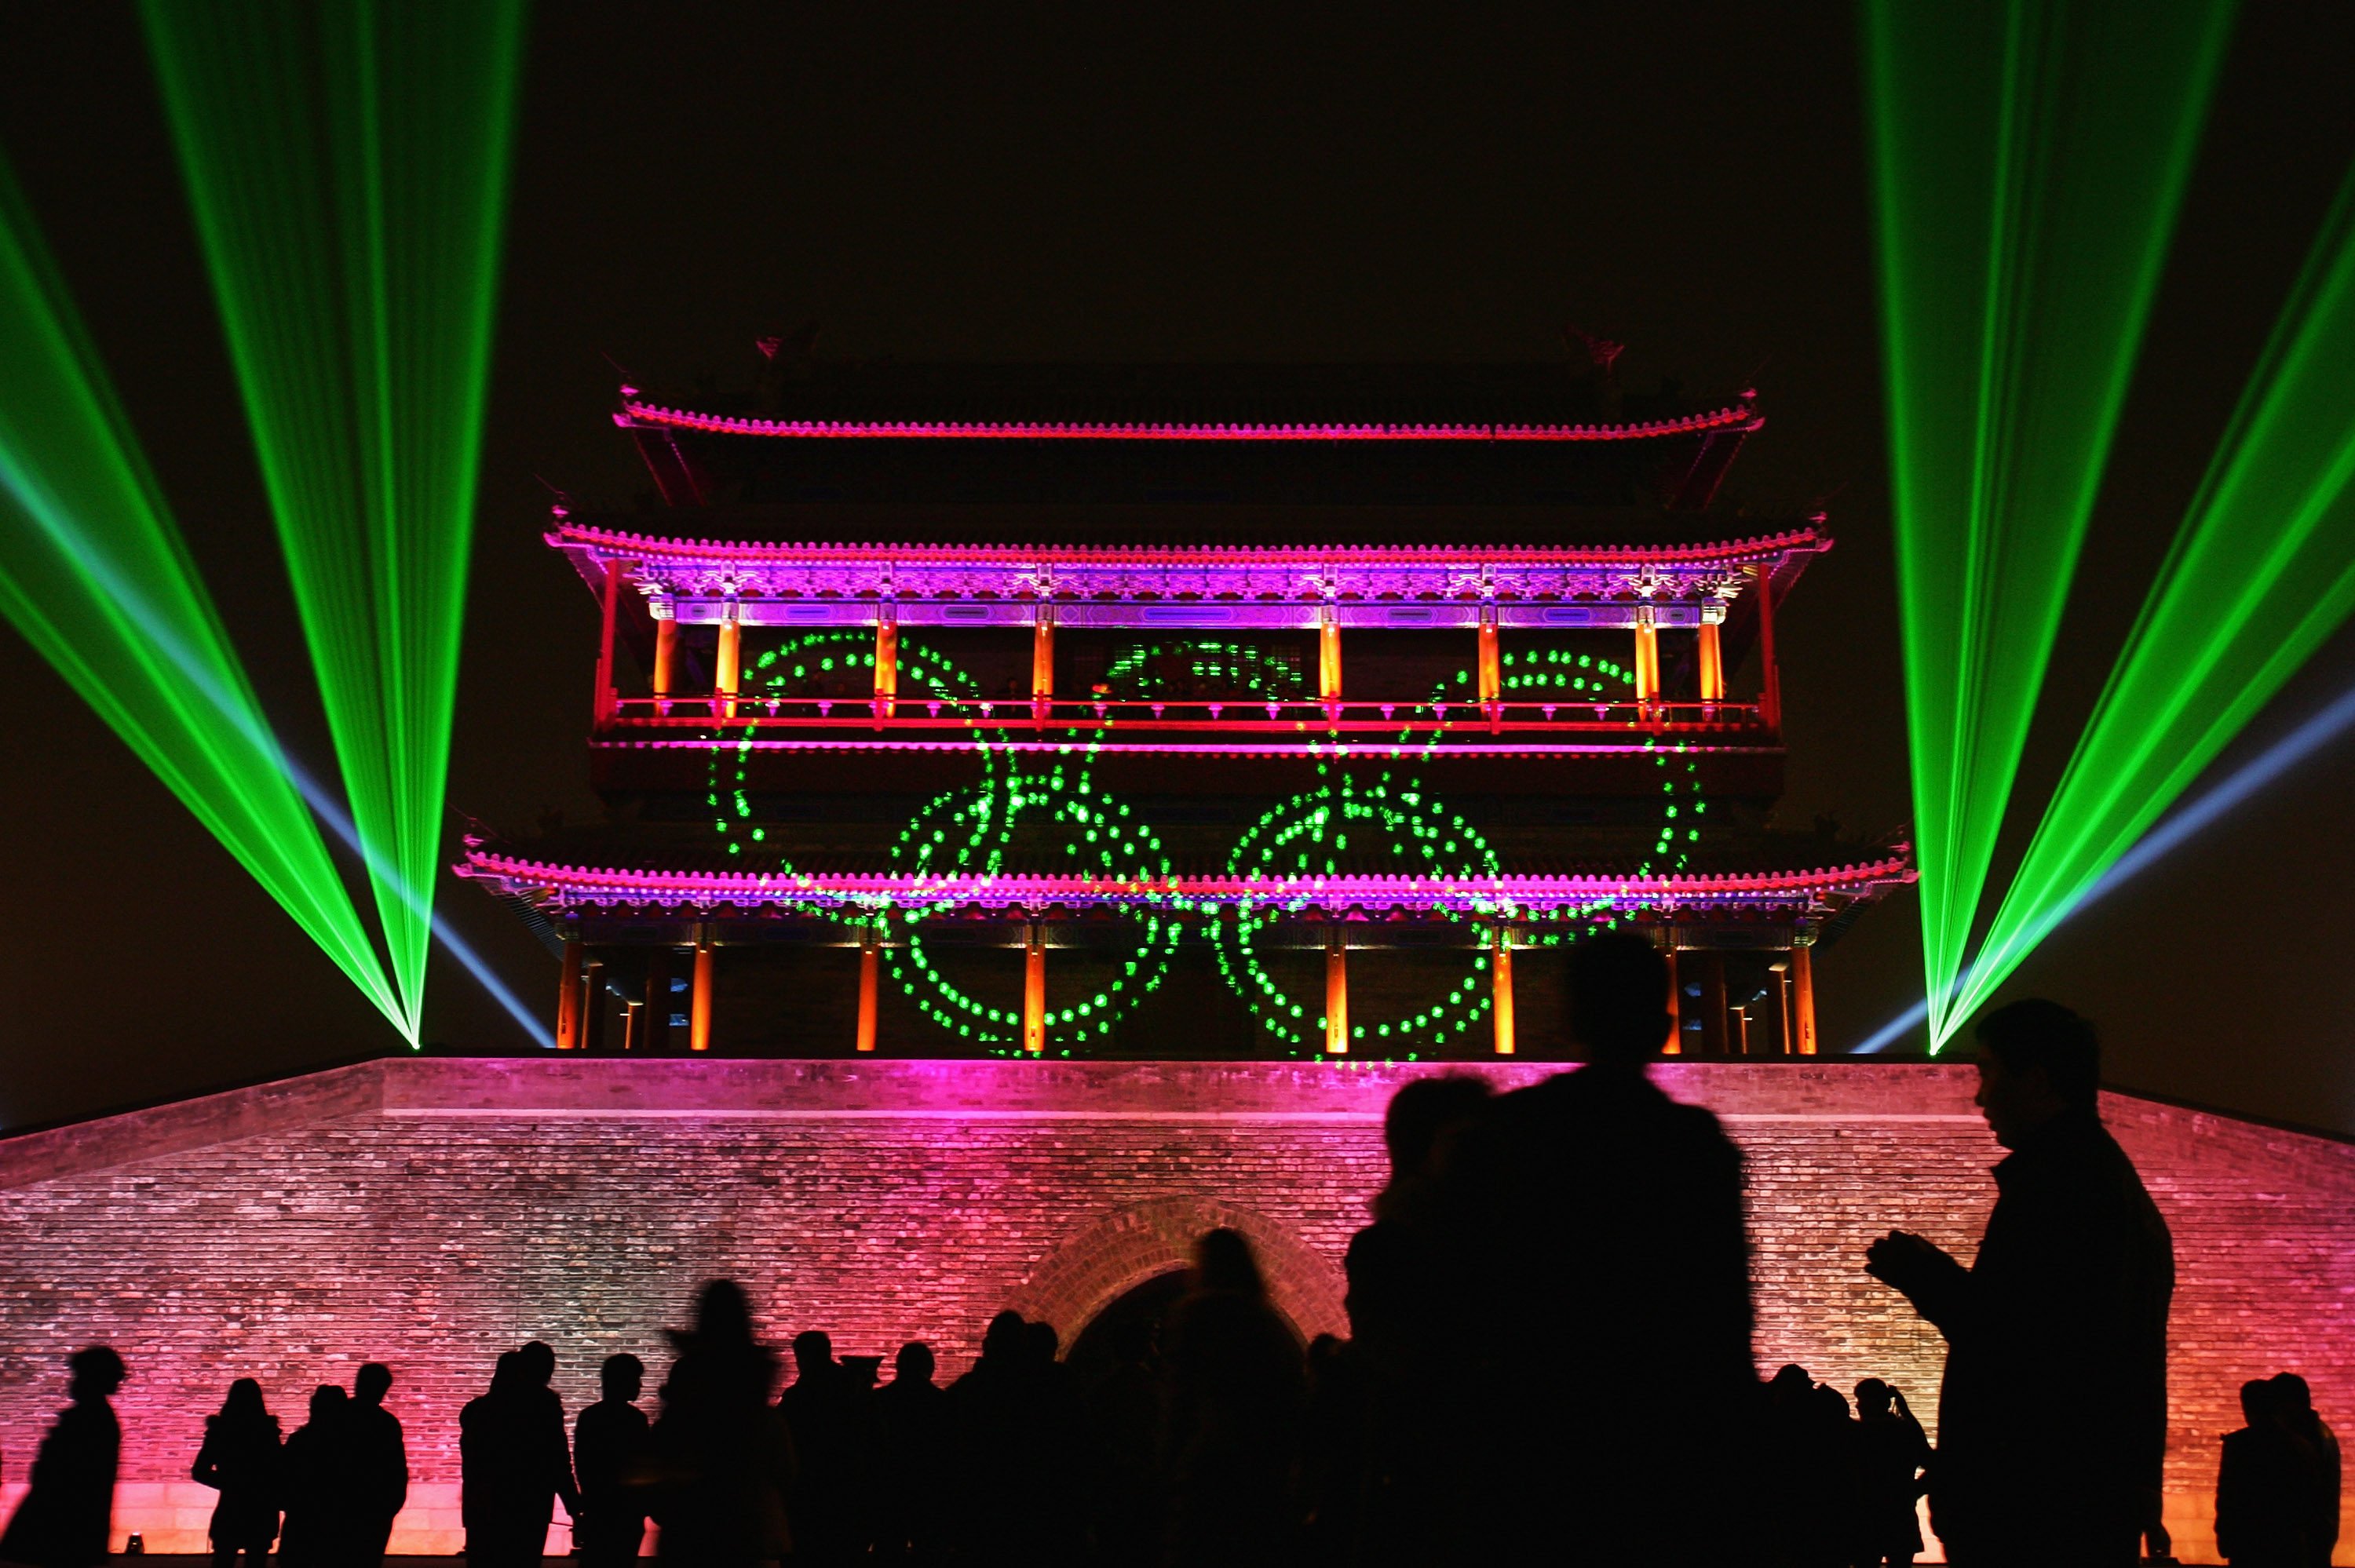 Visitors look at a laser performance in front of the Yongdingmen, or central south gate, in Beijing, rebuilt in 2003. The city is seeking Unesco World Heritage status for a large area of its former imperial inner city, including this gate. Photo: Getty Images